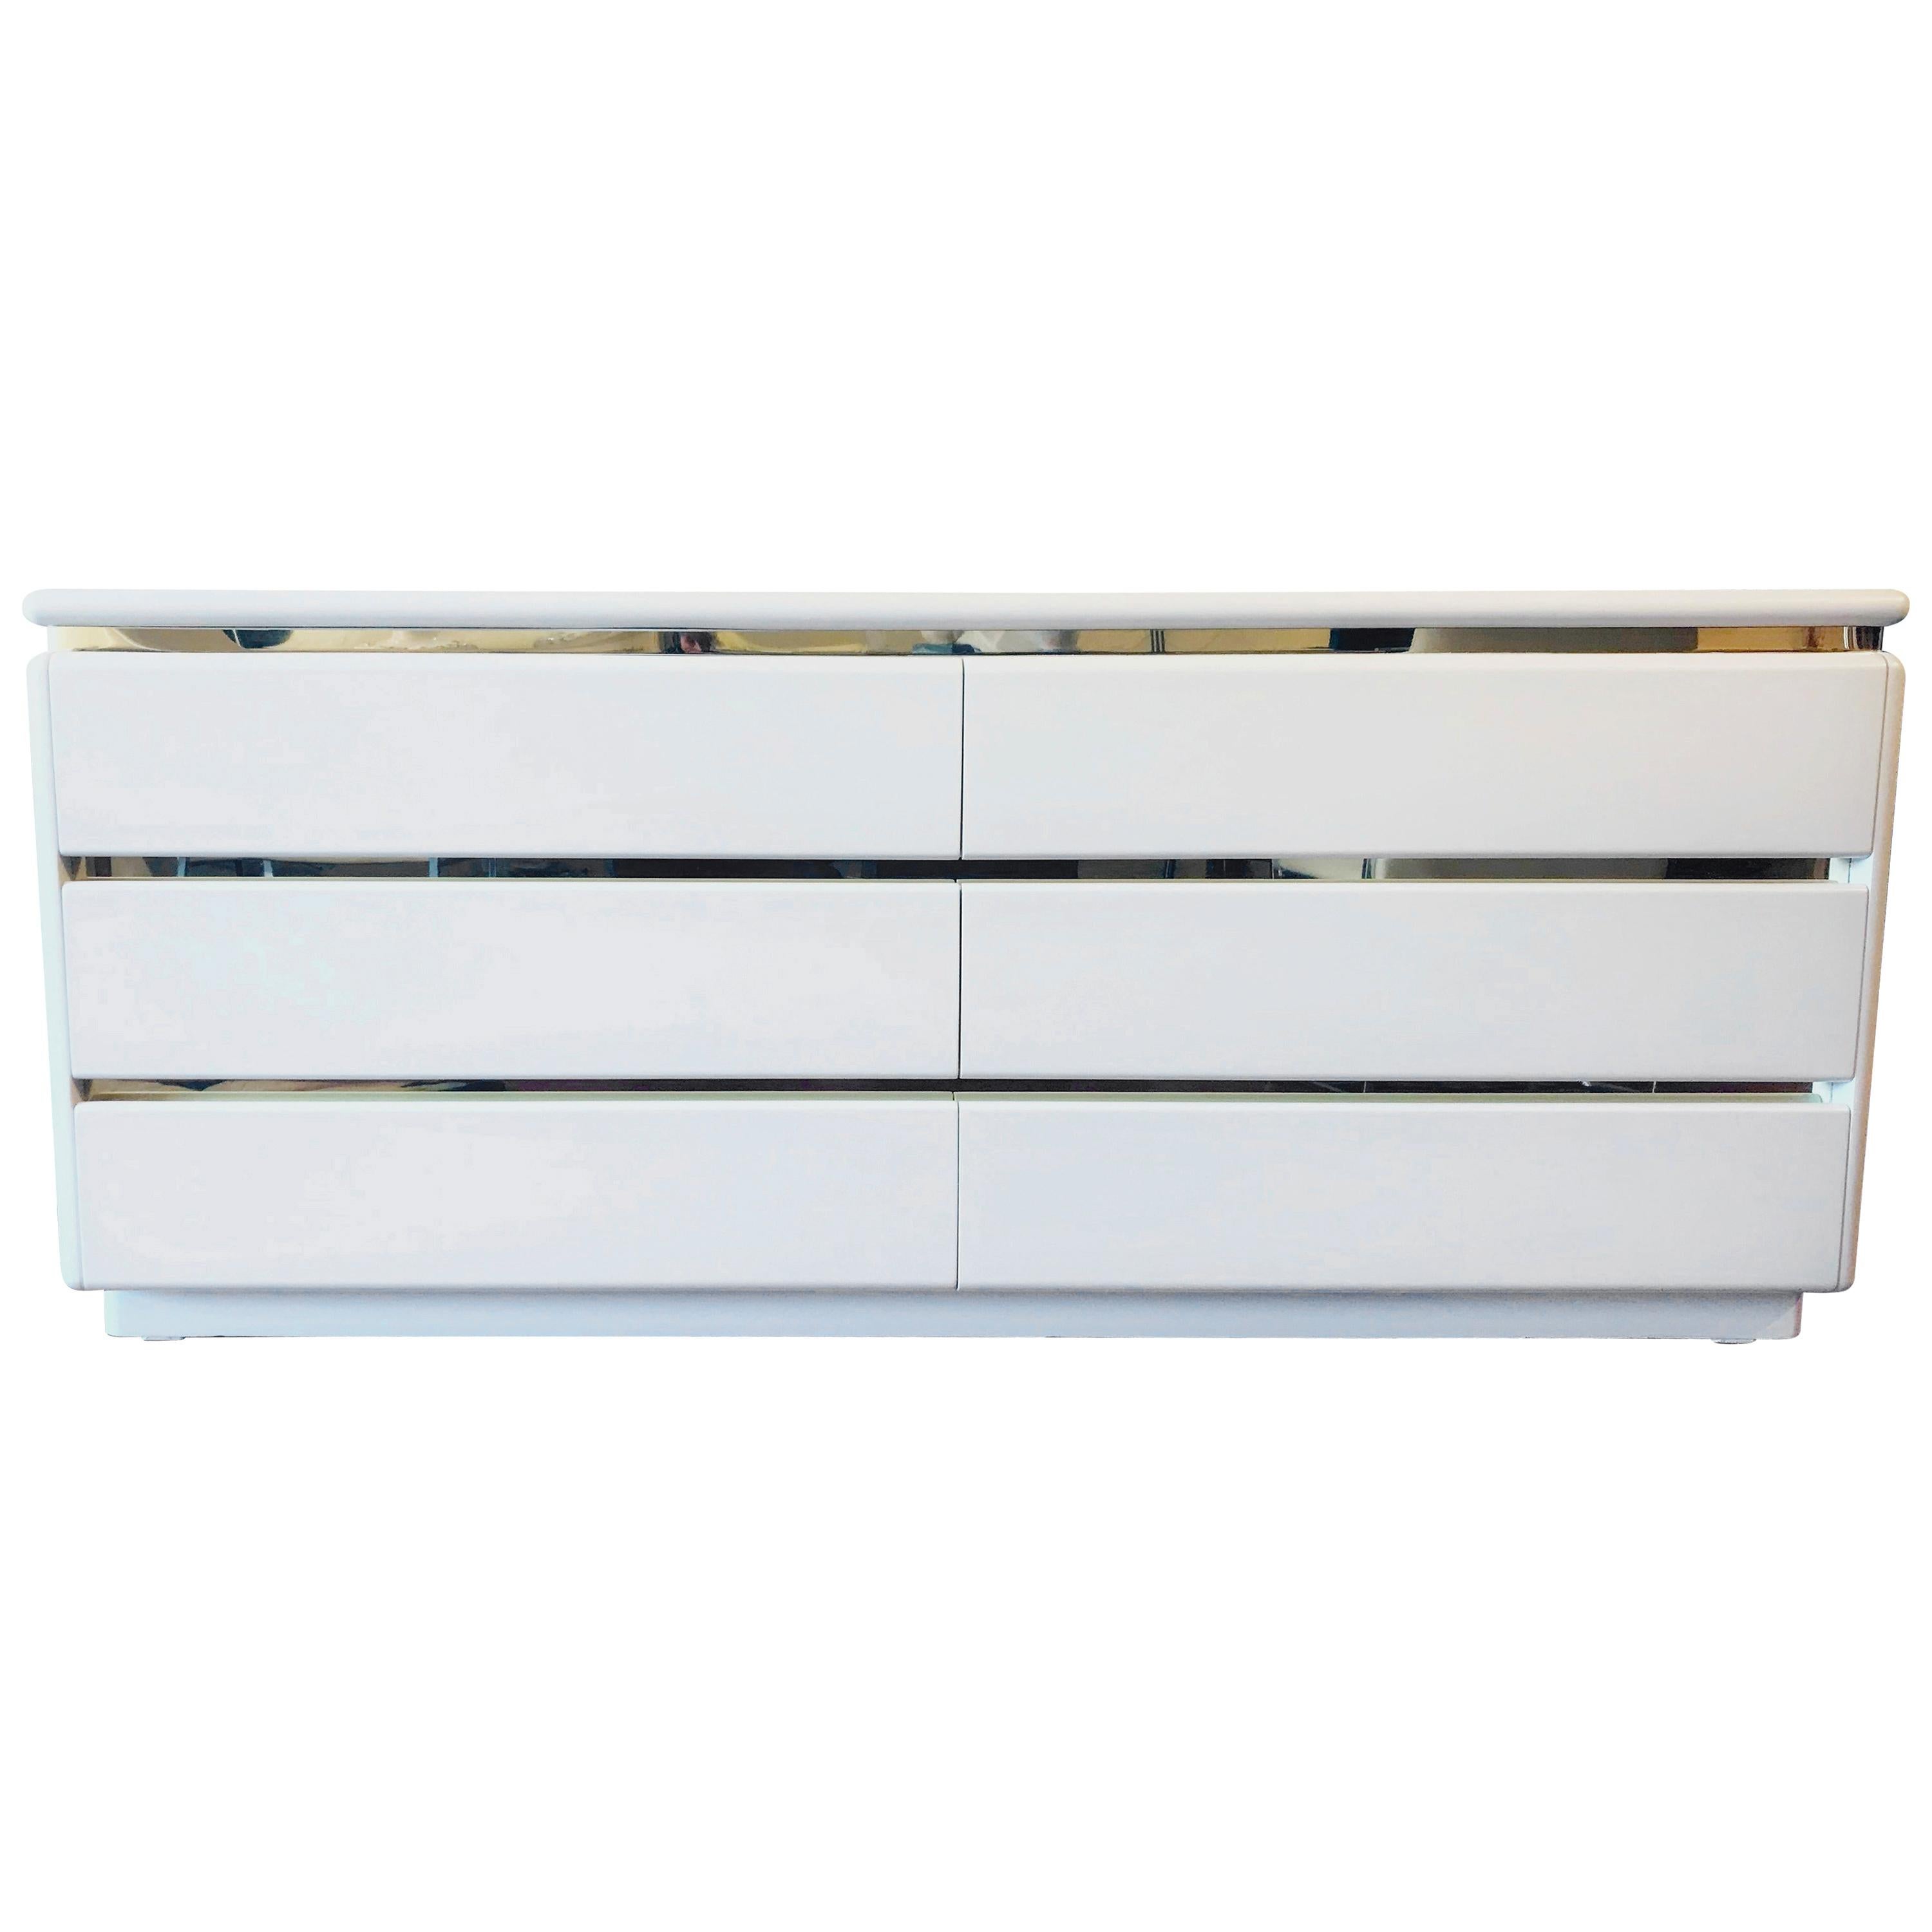 1980s White Lacquer and Brass Dresser